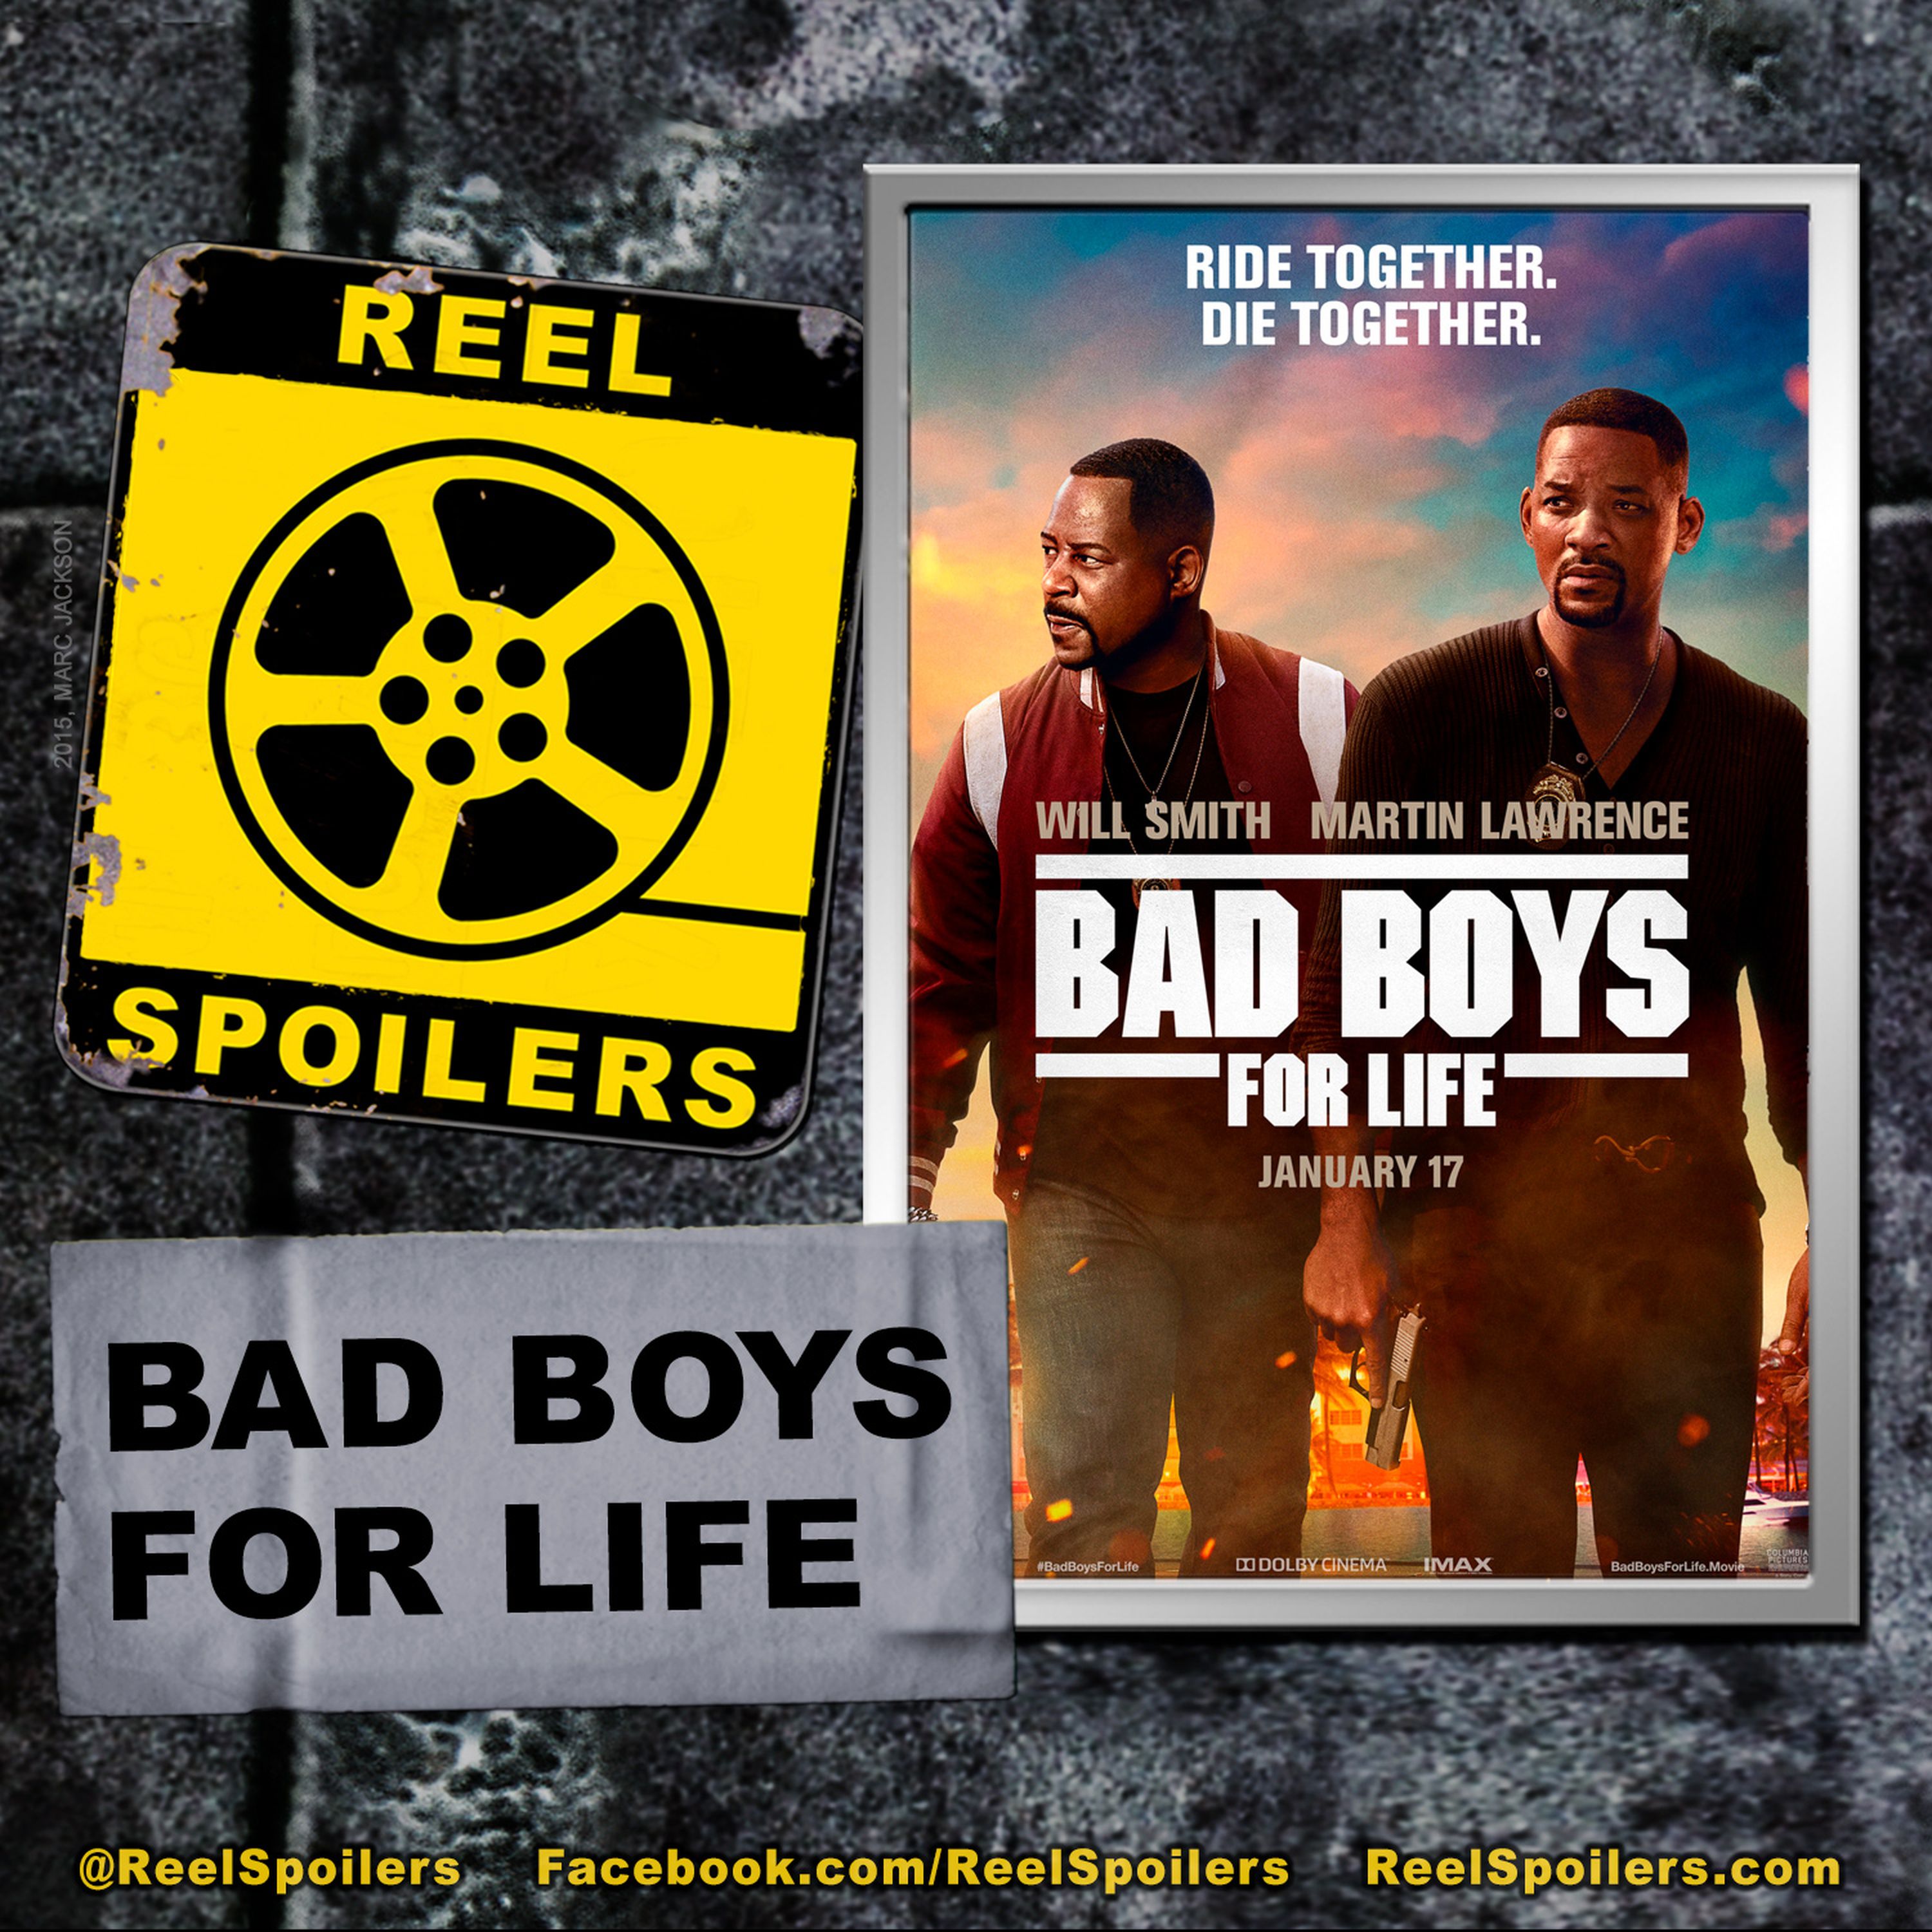 BAD BOYS FOR LIFE Starring Will Smith, Martin Lawrence Image